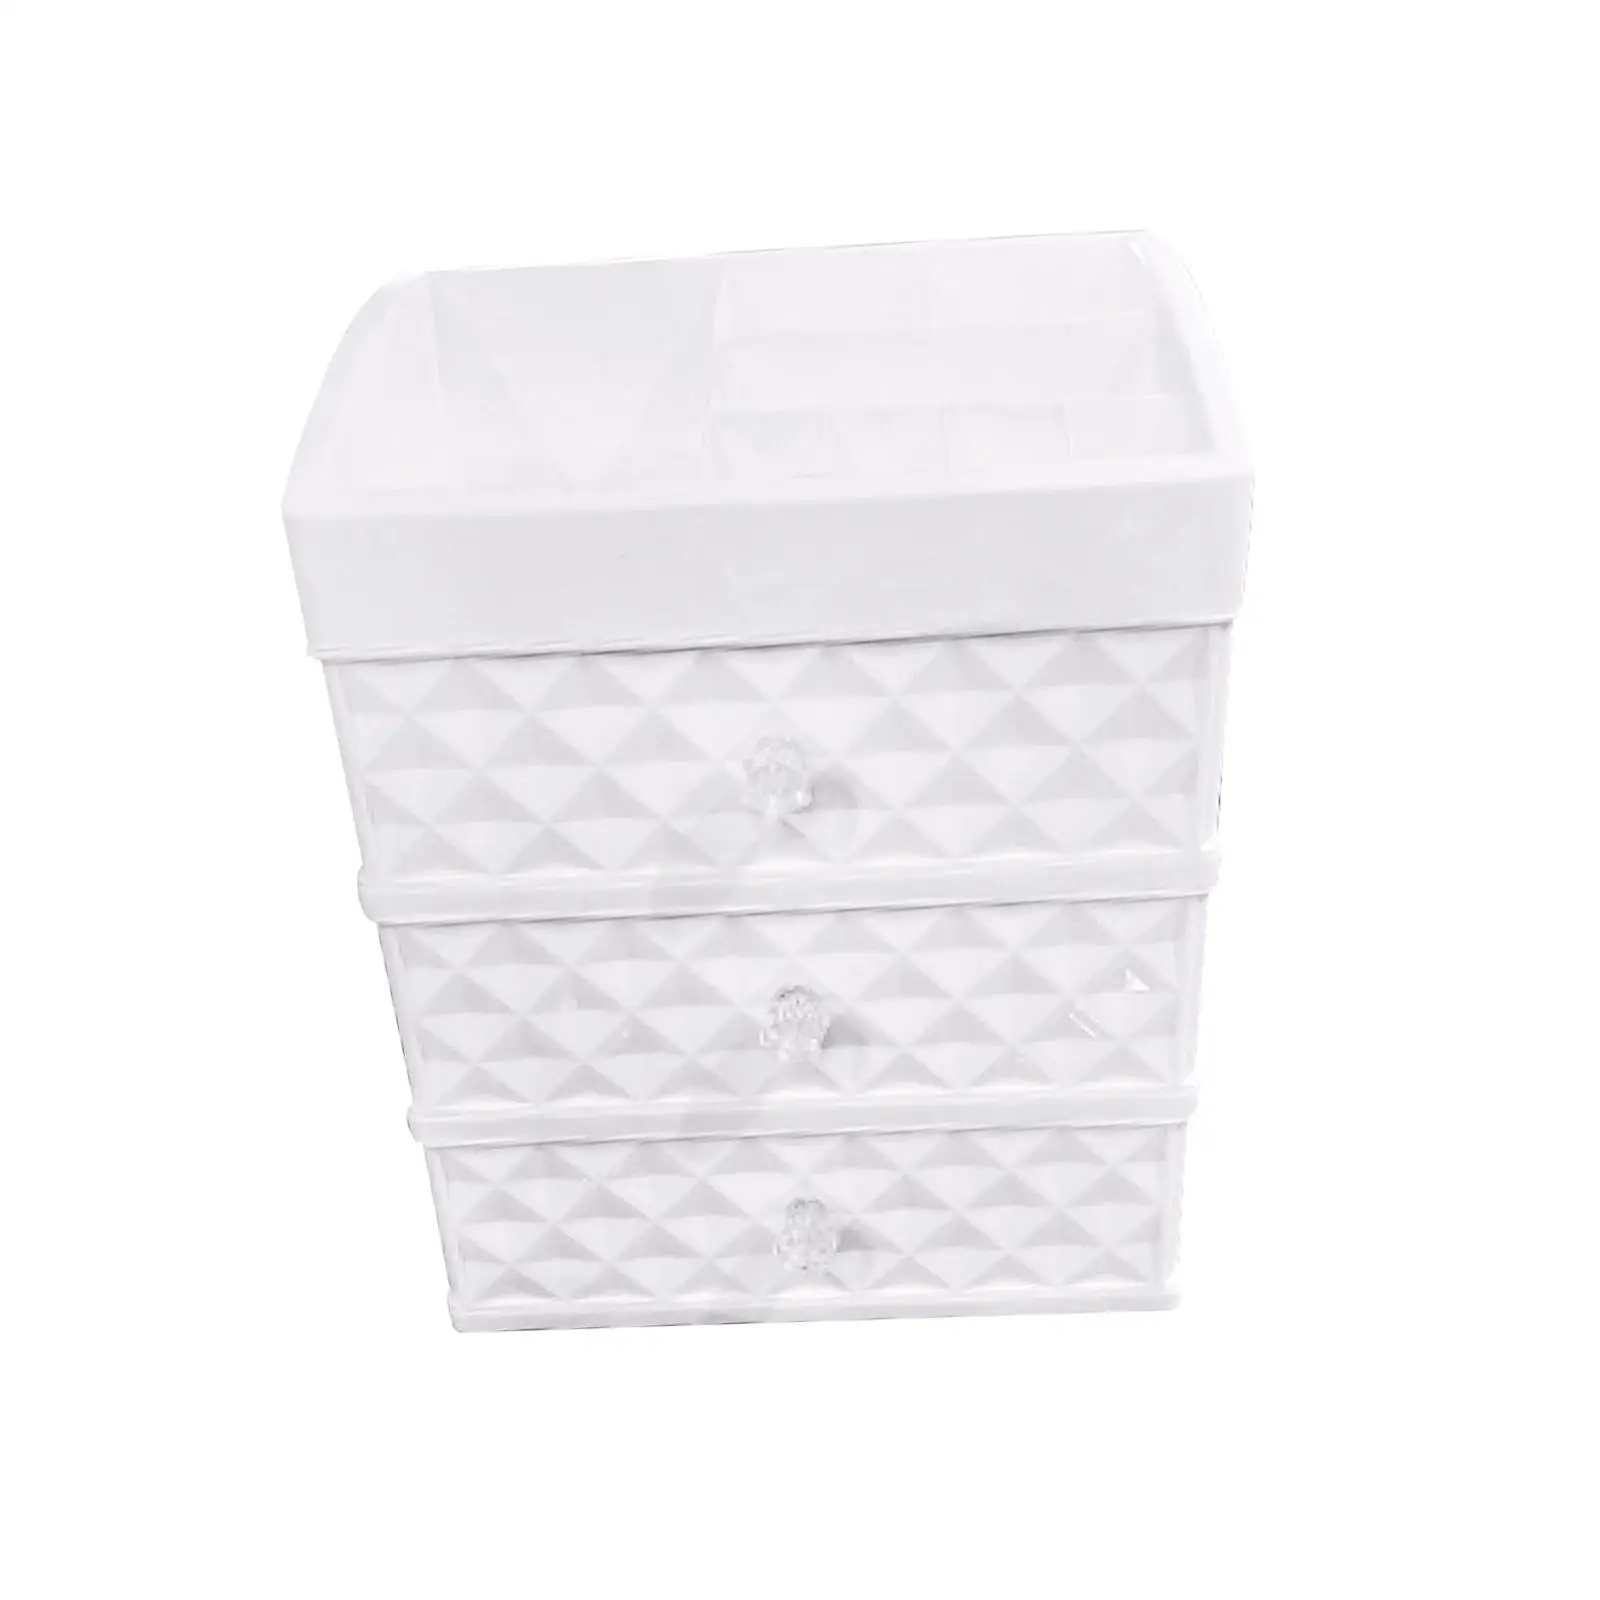 Makeup Organizer Case Cosmetic Storage Box with Drawers Display Case Removeable for Nail Lipstick Vanity Apartments Dresser